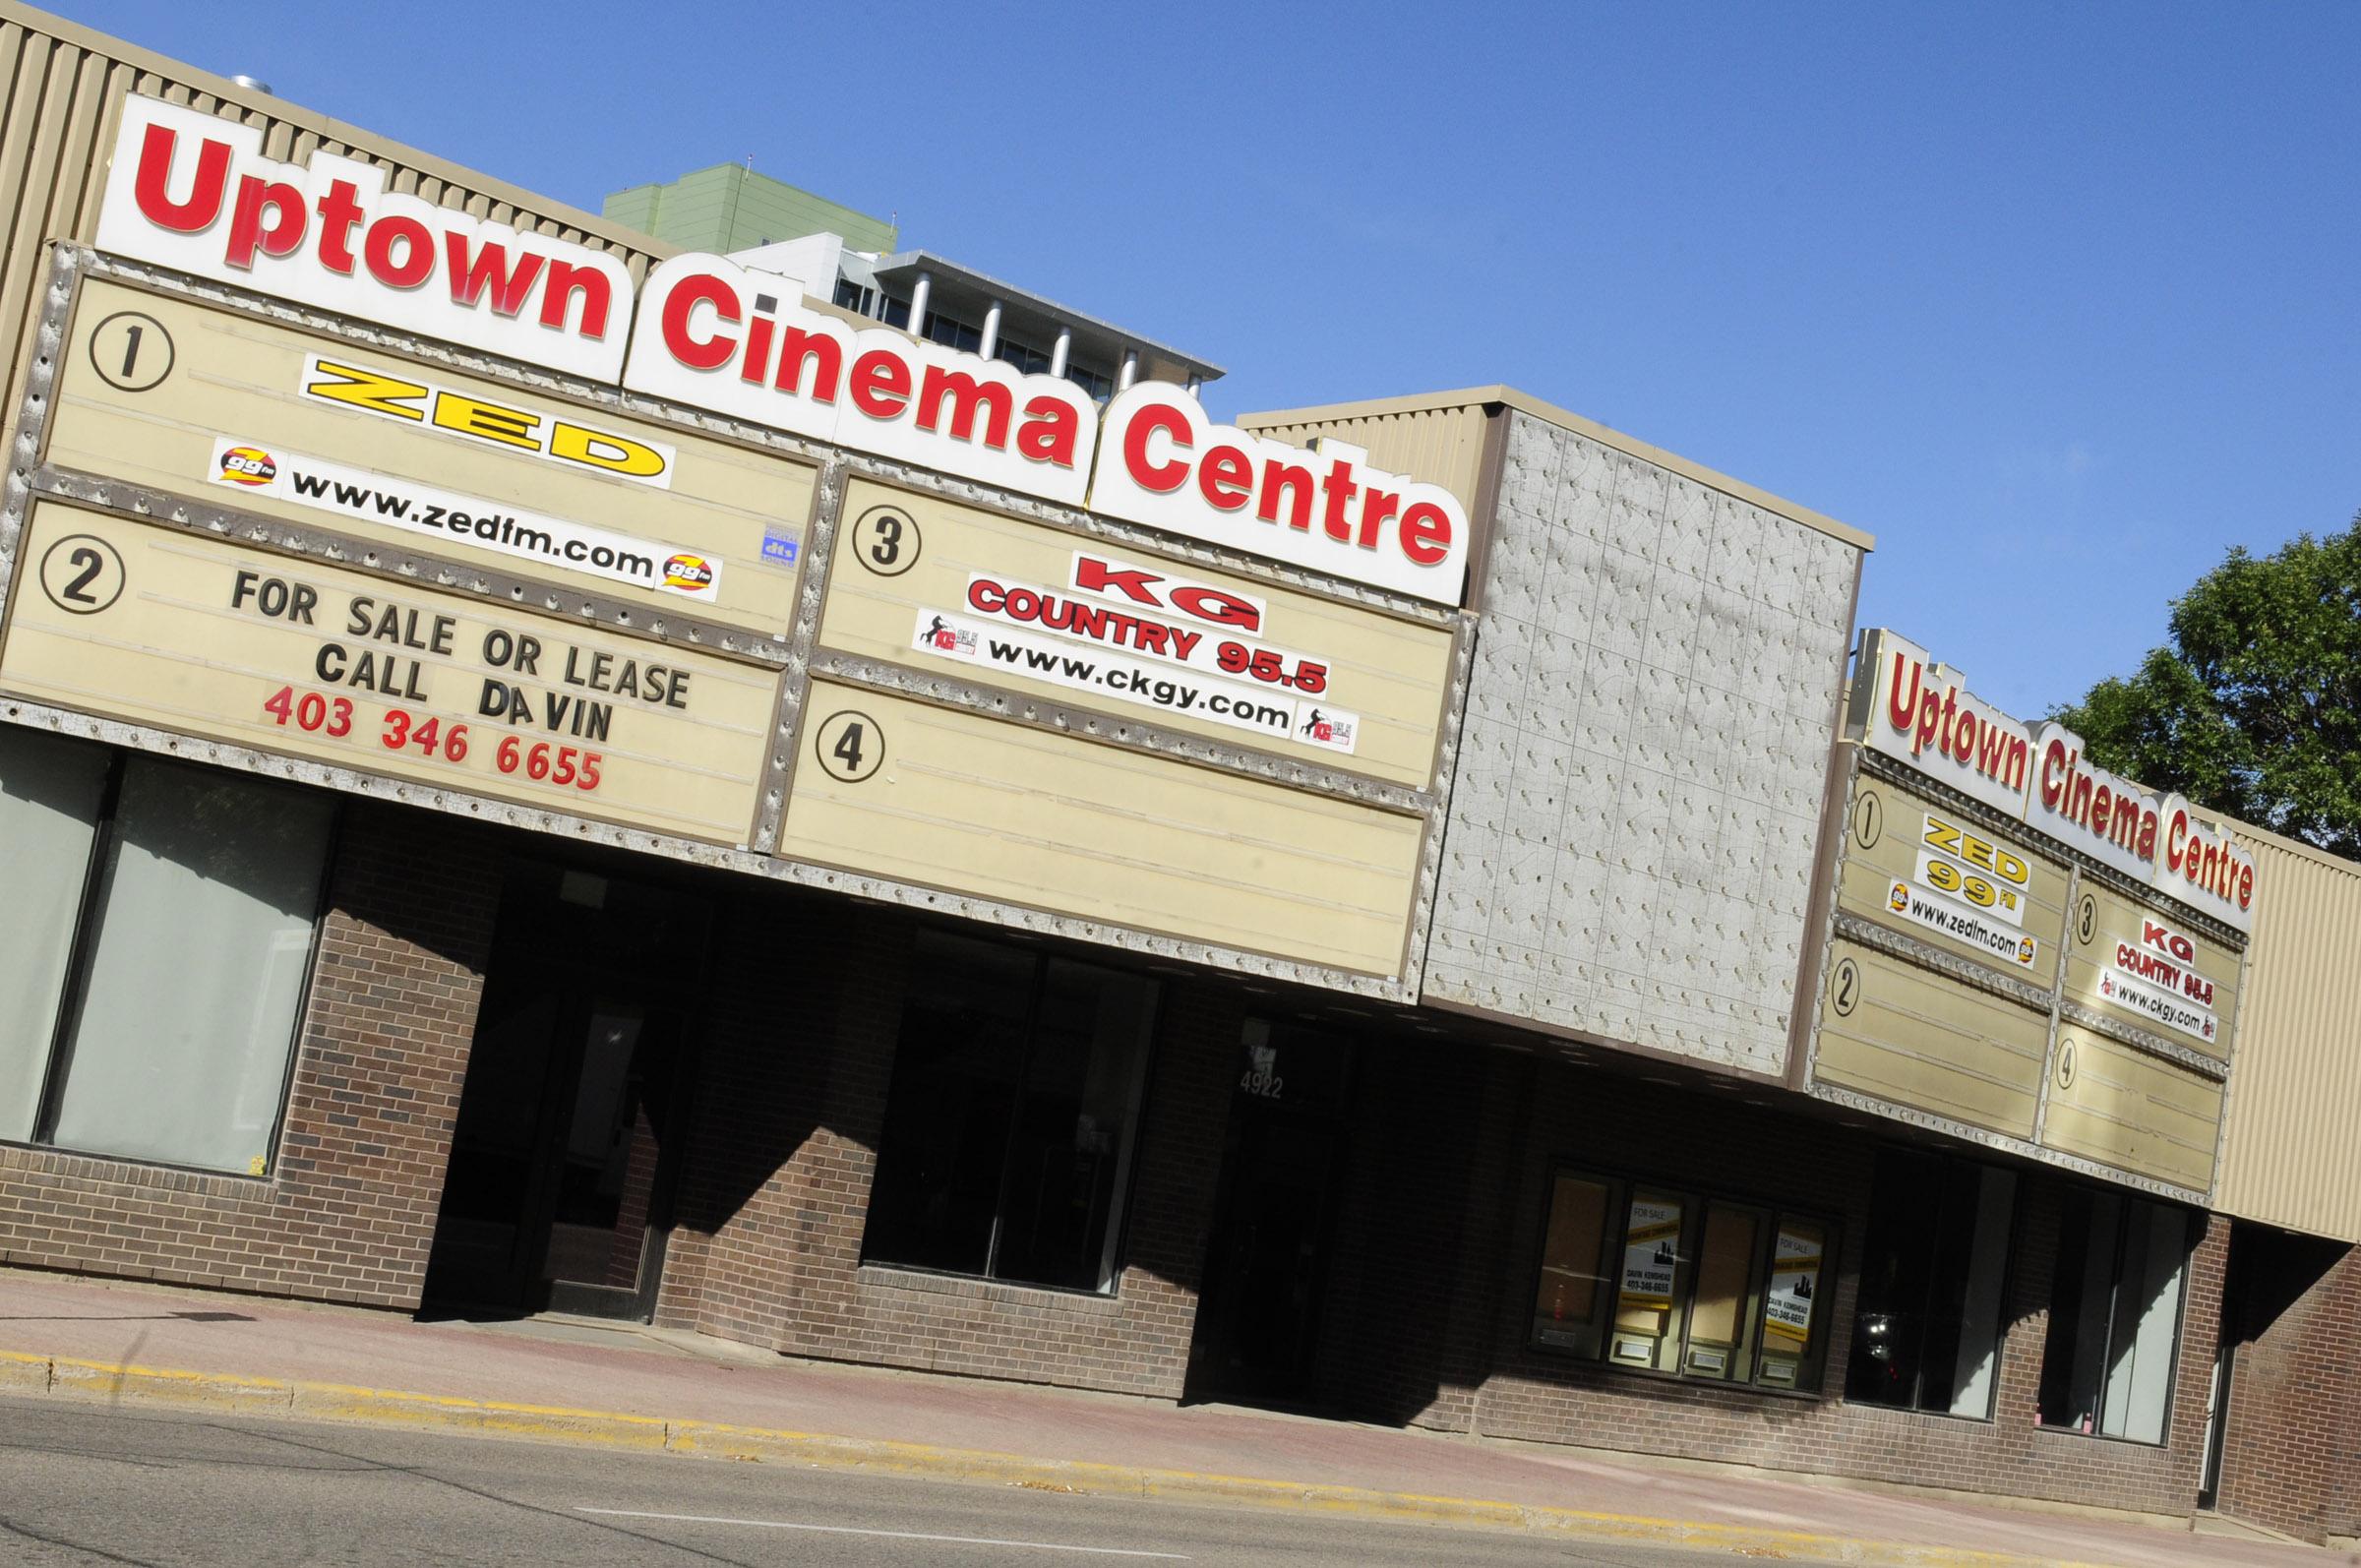 VACANT - The membership of CAT has given the go ahead for their board to acquire the old Uptown Cinema Centre in Red Deer.